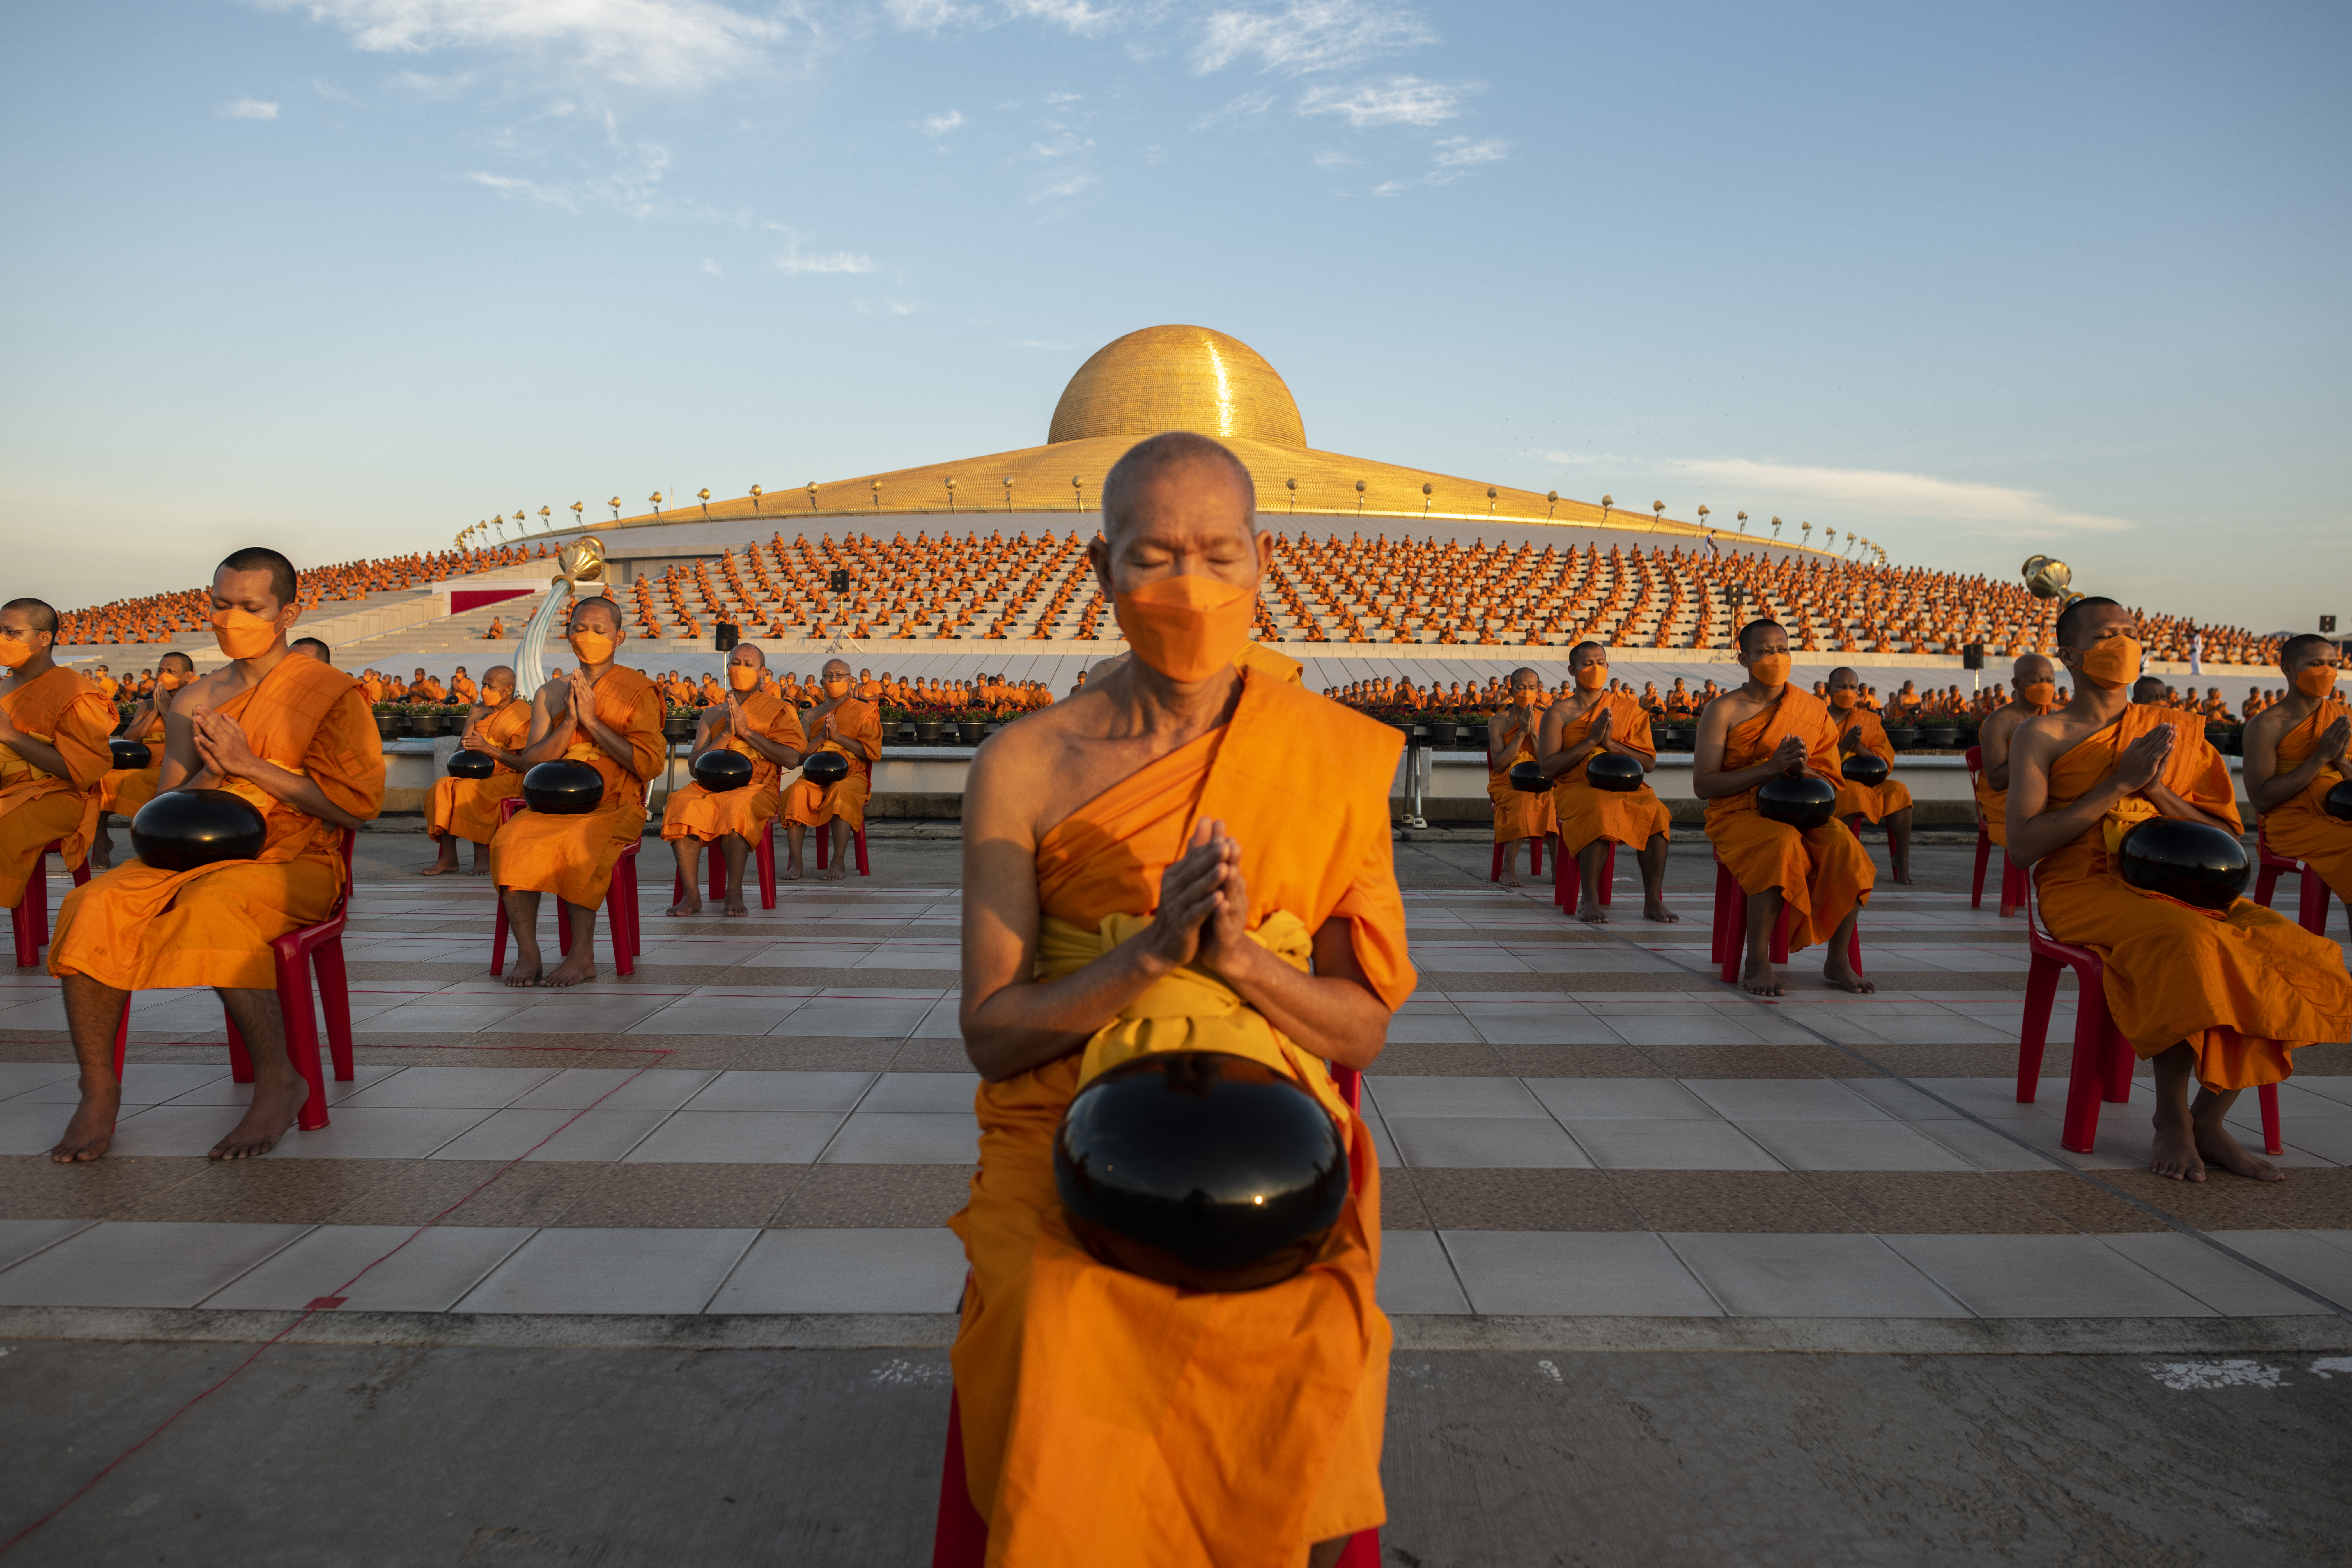 BANGKOK, THAILAND - JANUARY 01: Buddhist monks pray during the mass alms giving ceremony for New Year where 3,000 monks attend at Wat Phra Dhammakaya Buddhist Temple on January 01, 2023 in Pathum Thani, Thailand. Alms giving ceremony is commonly practiced by Thai Buddhists during New Year. It has been three years since Wat Phra Dhammakaya Buddhist Temple last organized a mass alms giving ceremony due to the pandemic. (Photo by Sirachai Arunrugstichai/Getty Images)